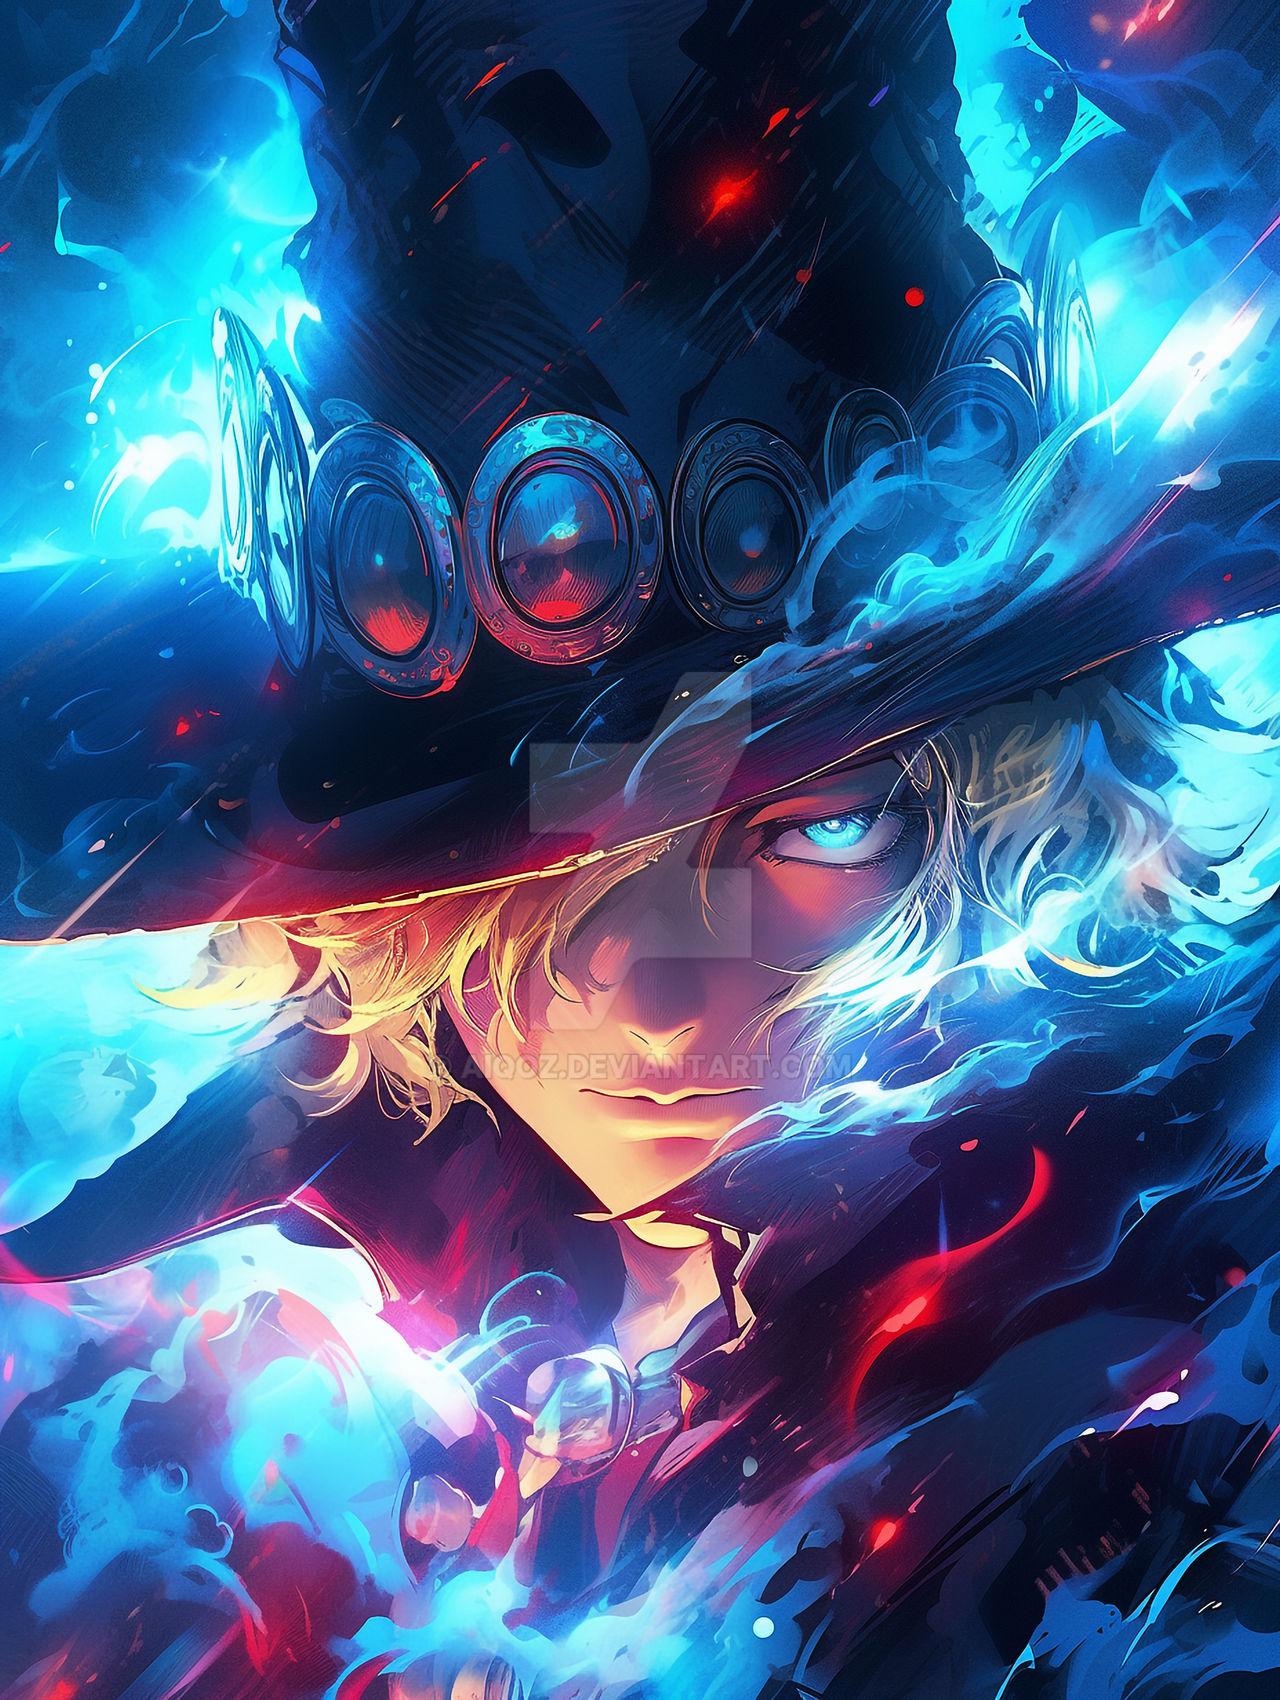 Sabo - One Piece by Aiqoz on DeviantArt